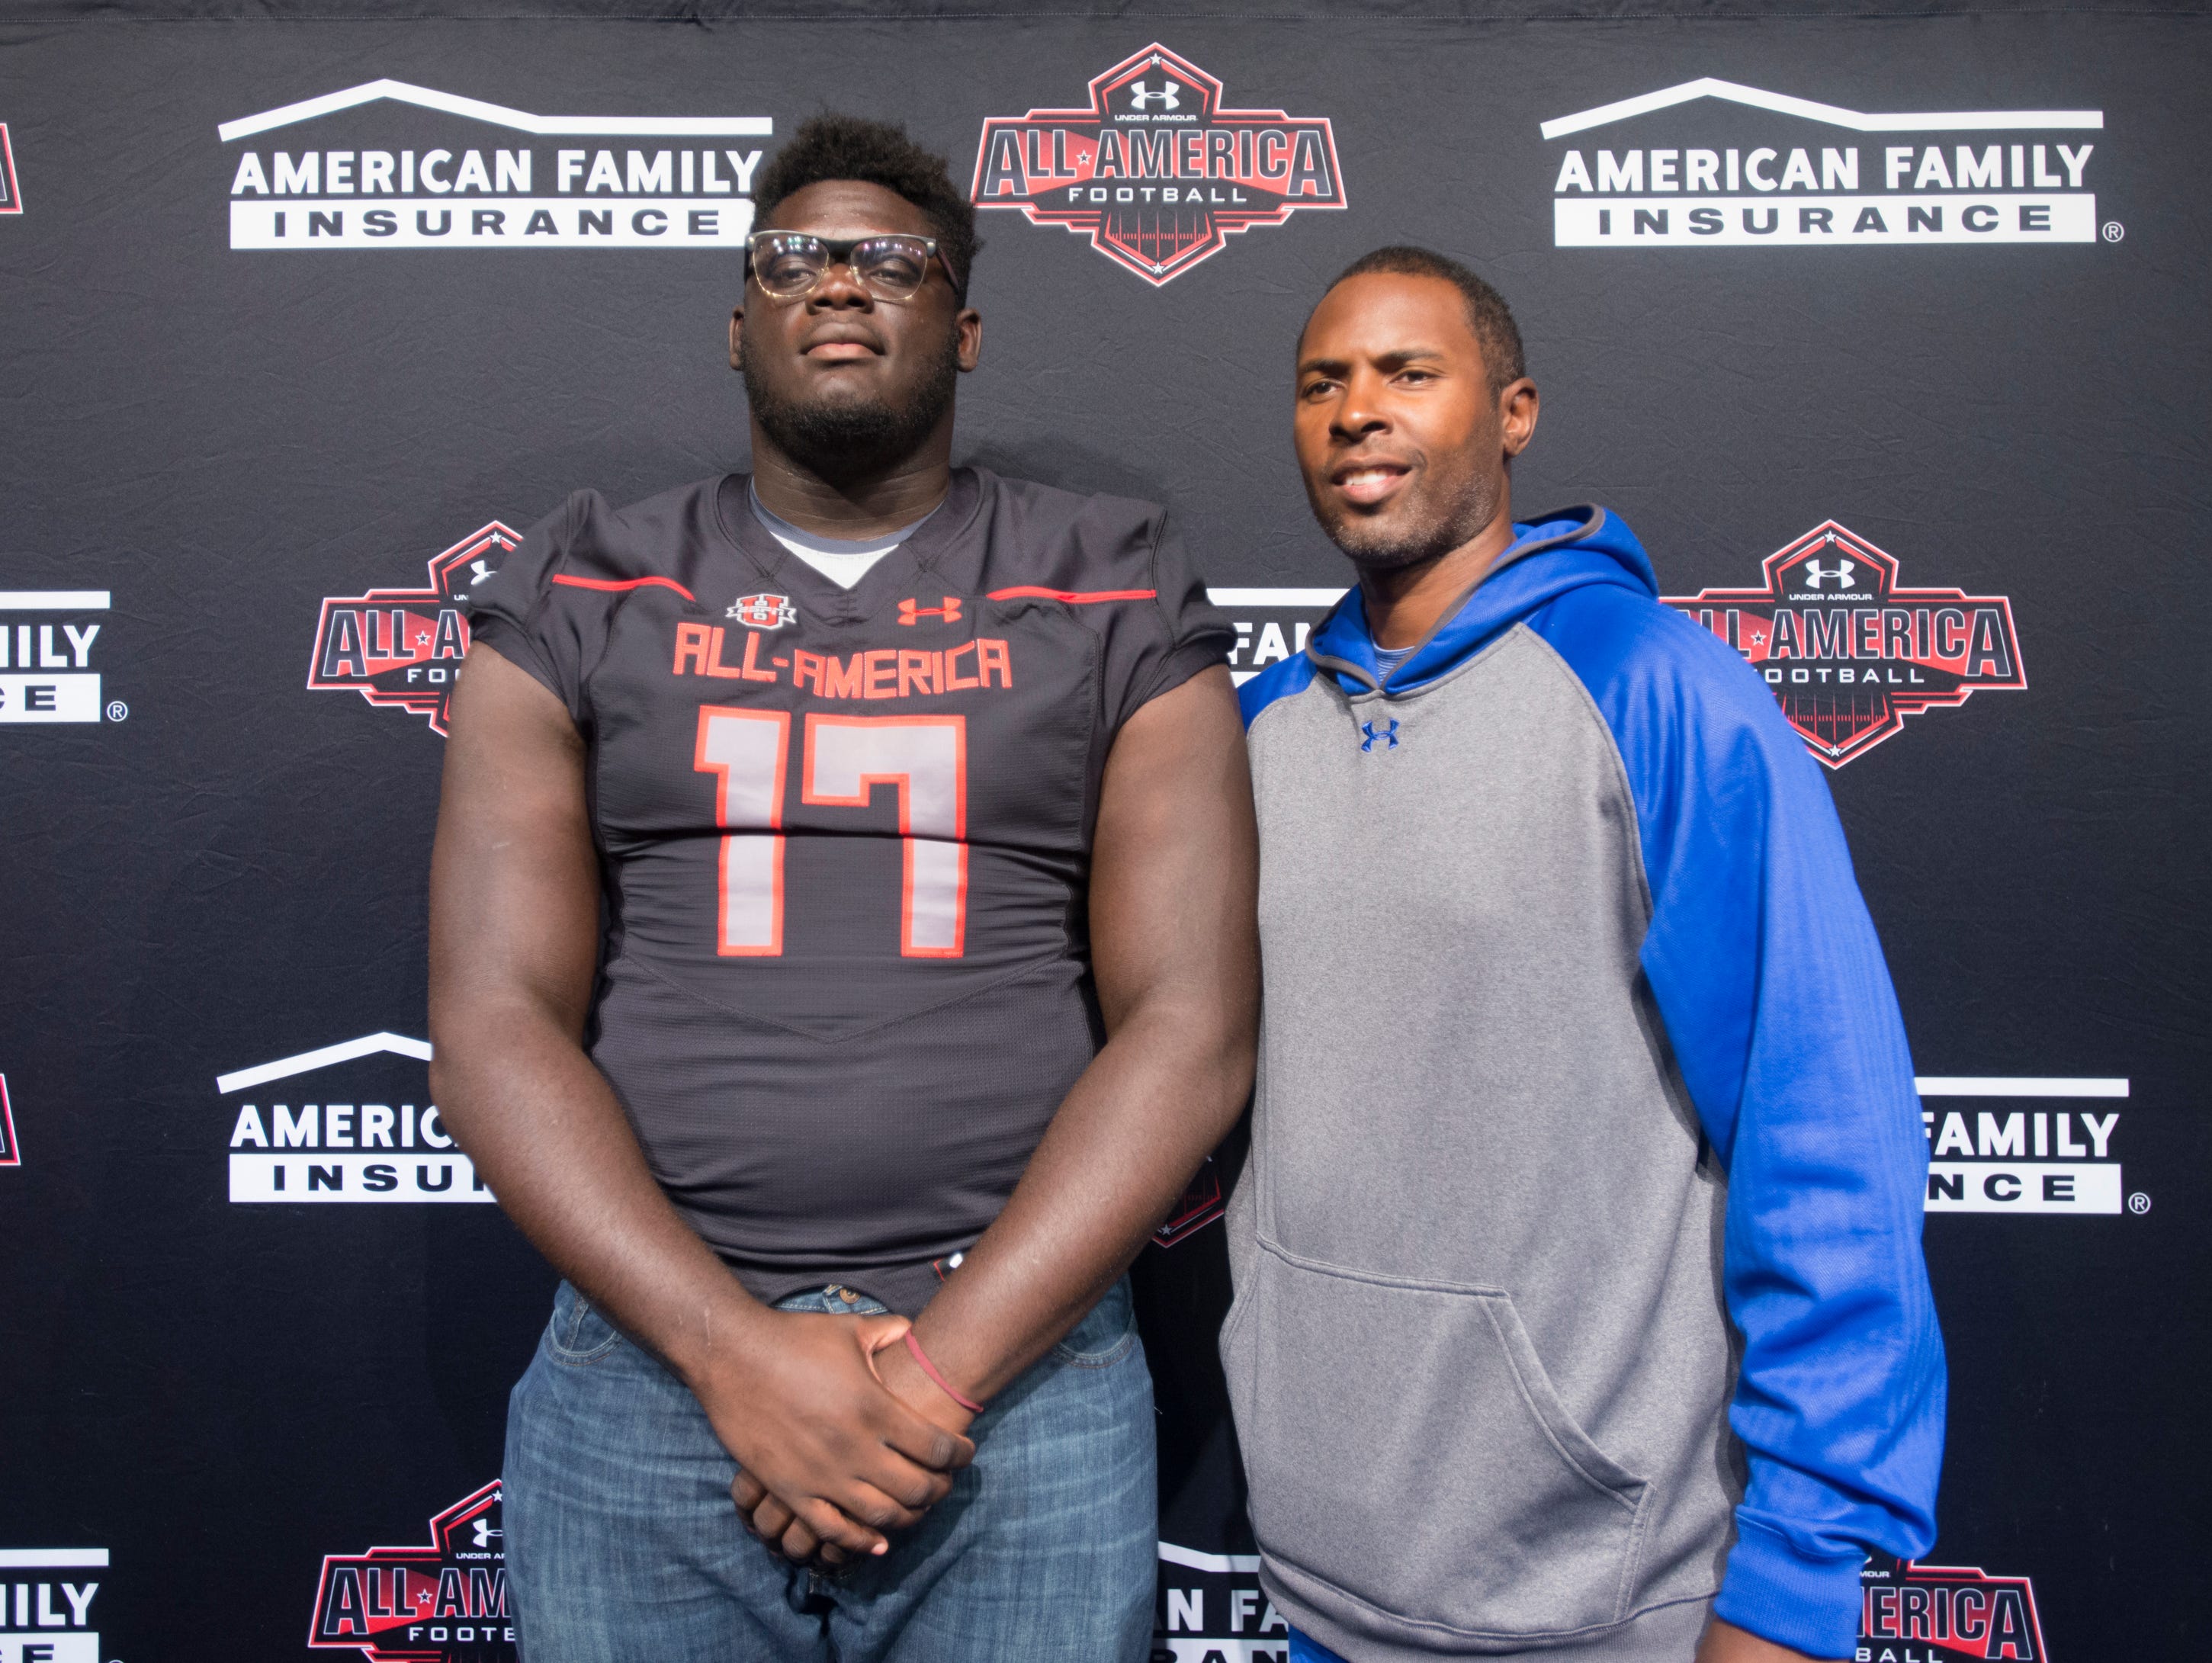 Football player Alex Leatherwood and coach Charlie Ward pose for a photo during the event announcing that Leatherwood has been selected for the annual Under Armour High School All-America Game at Booker T. Washington High School in Pensacola on Wednesday, October 12, 2016. The game featuring more than 90 of the nation's best senior high school football players will be played on January 1, 2017.